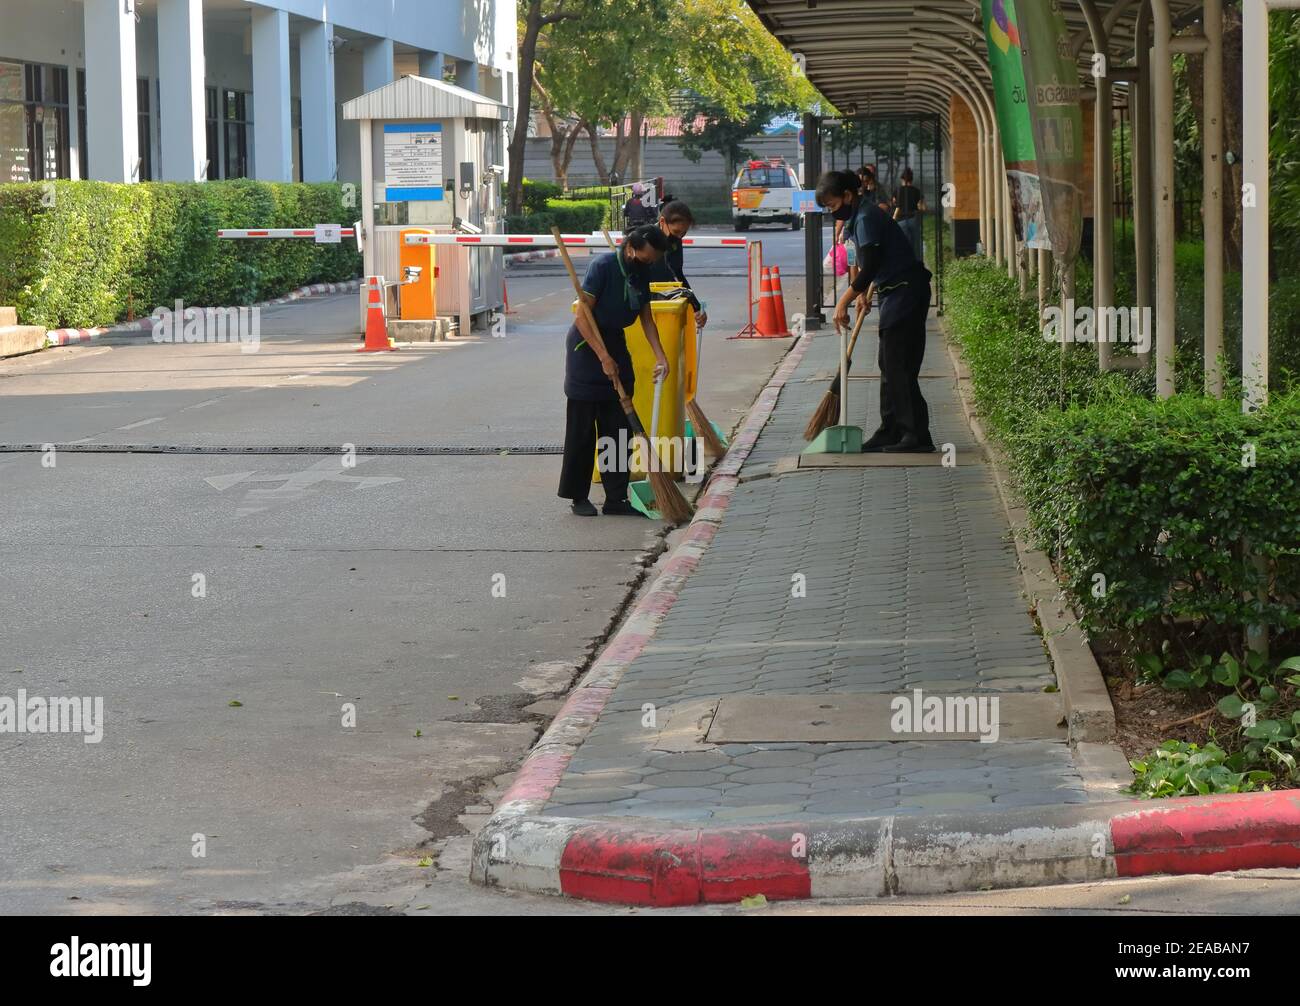 Bangkok, Thailand - February 2, 2021 : Female workers are sweeping street and pavement by using brooms and dustpans, the brooms are in blurred motion Stock Photo